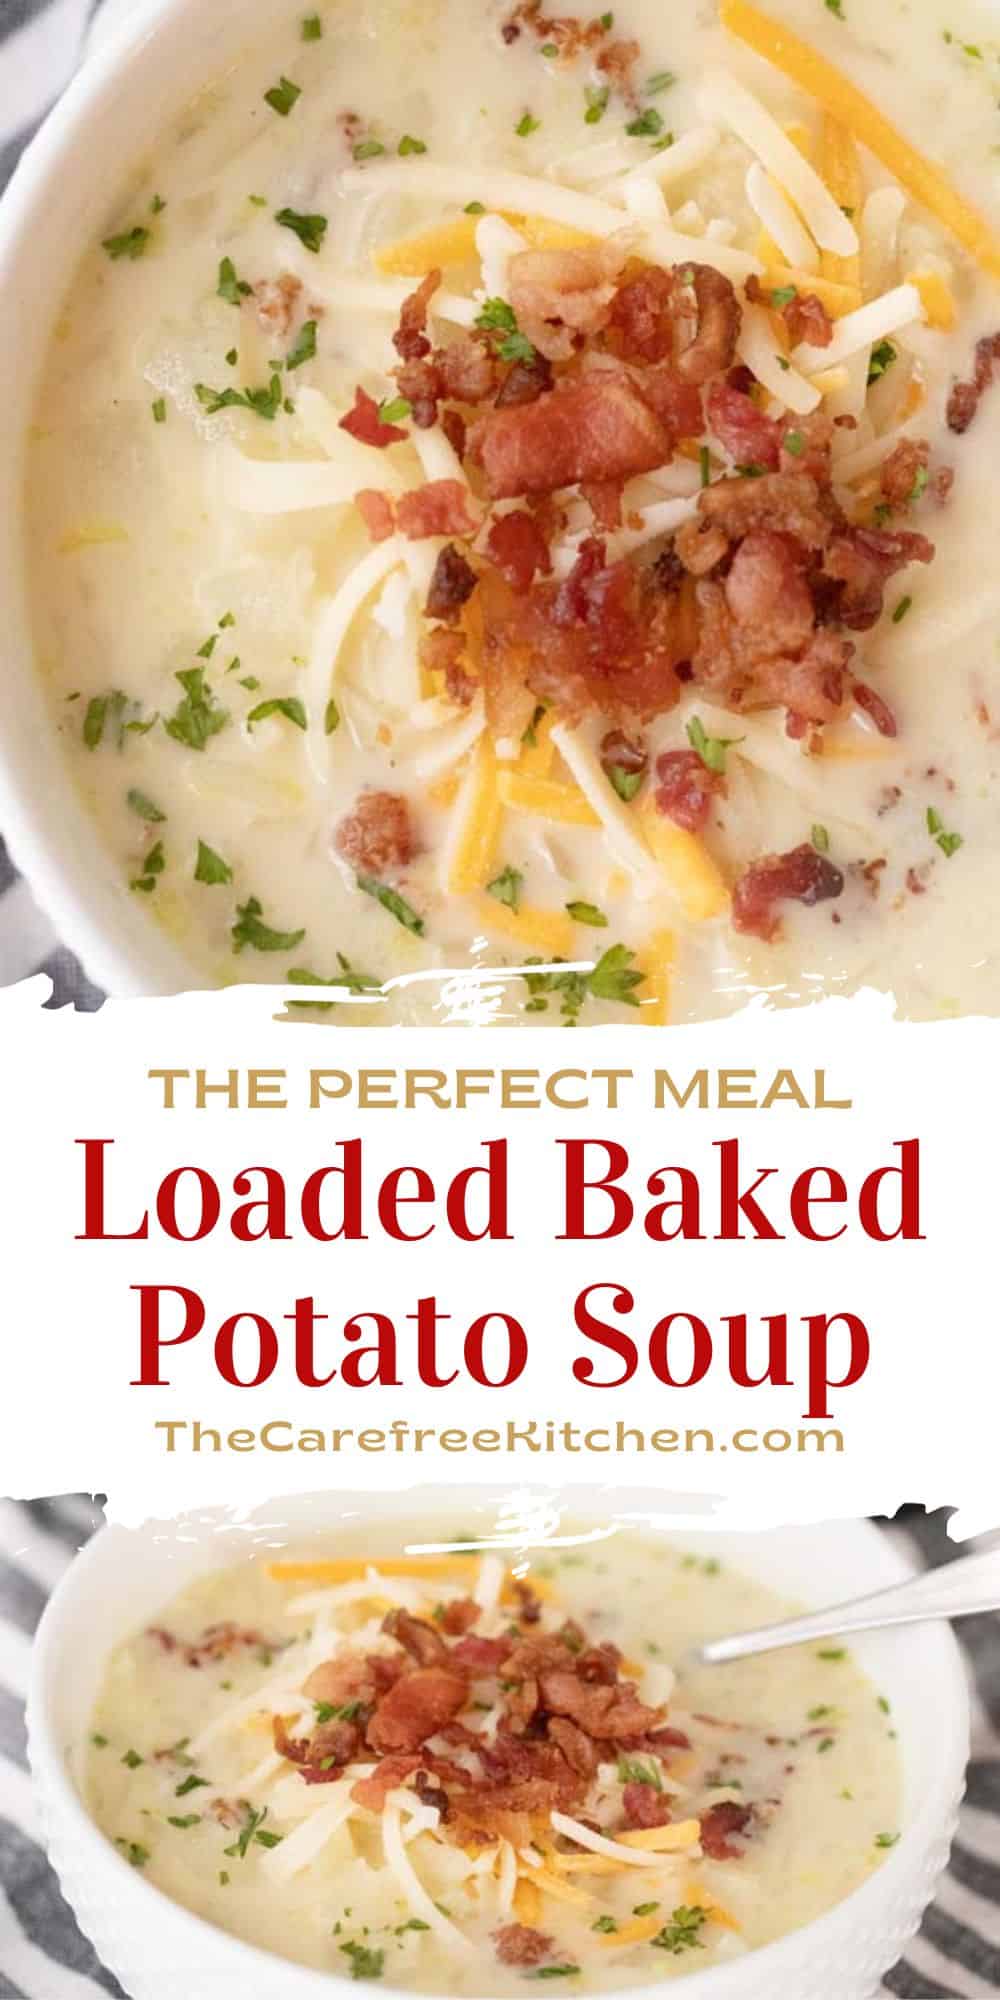 Easy Loaded Baked Potato Soup - The Carefree Kitchen